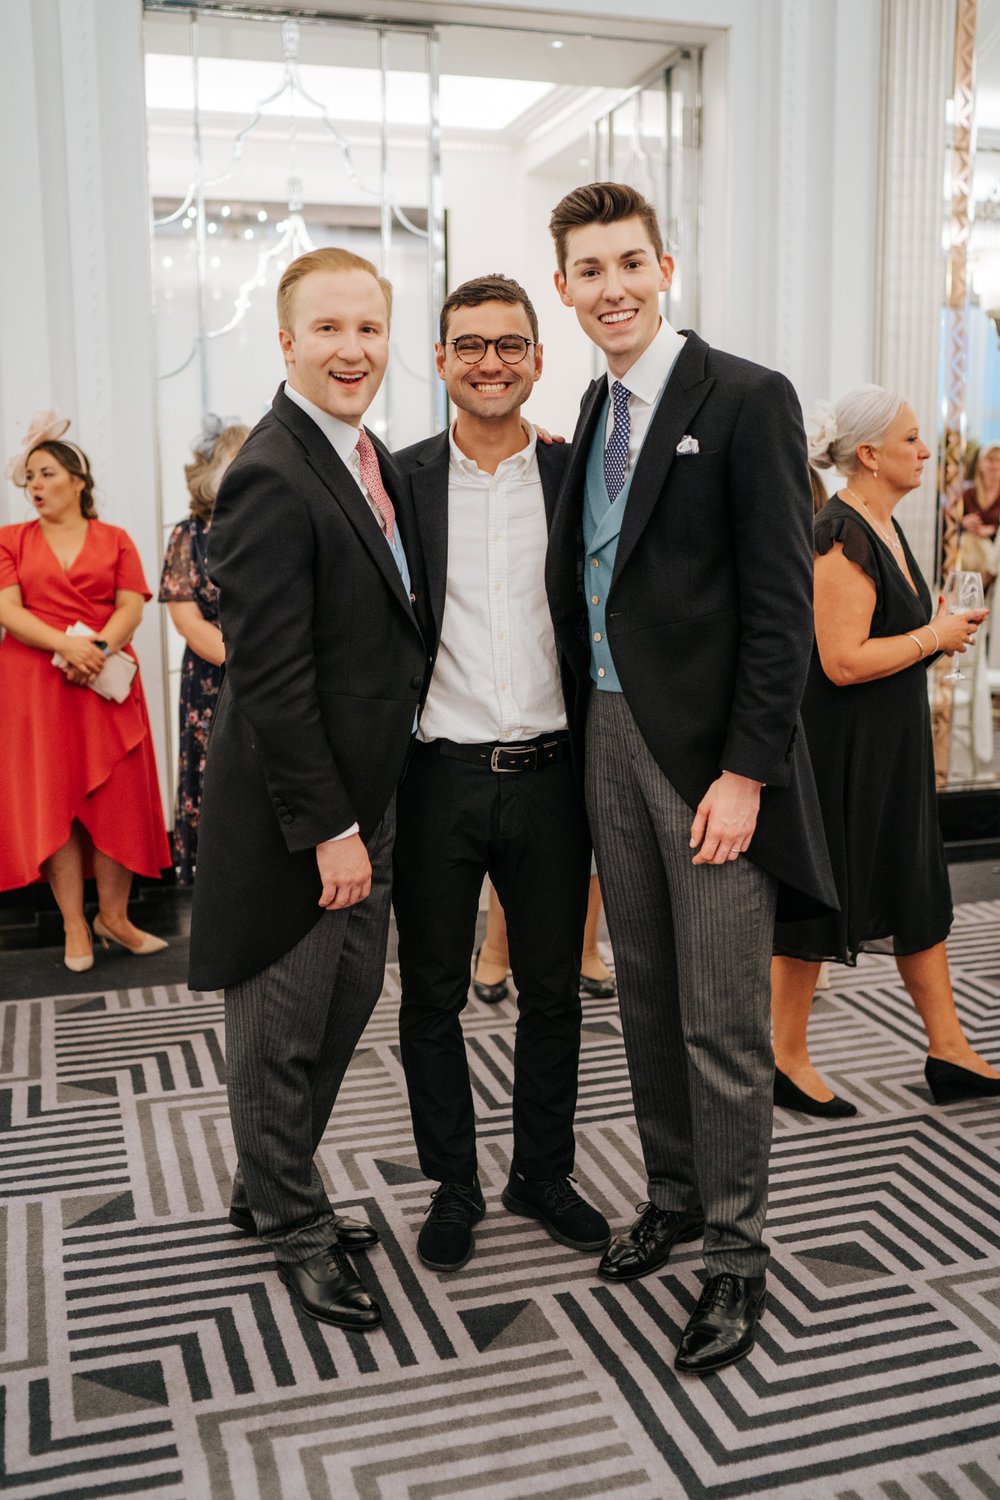 Michael Maurer Photography stands with William Hanson and Michael Worrall for staged photograph at Claridge's wedding